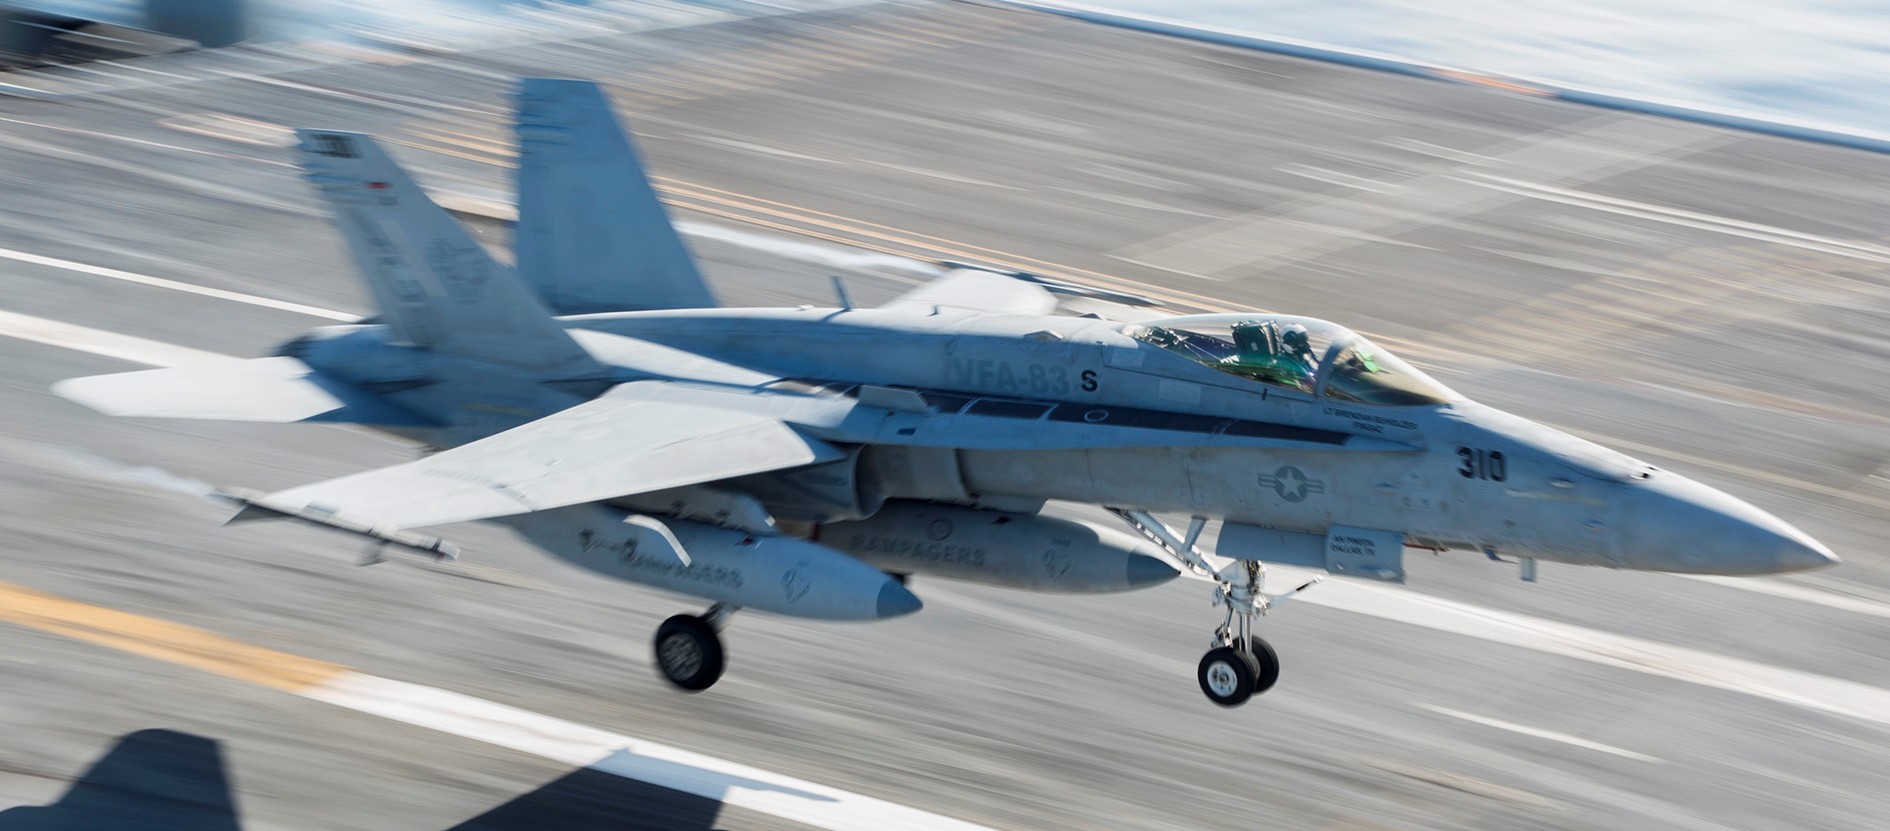 vfa-83 rampagers strike fighter squadron f/a-18c hornet cvw-7 uss harry s. truman cvn-75 68p